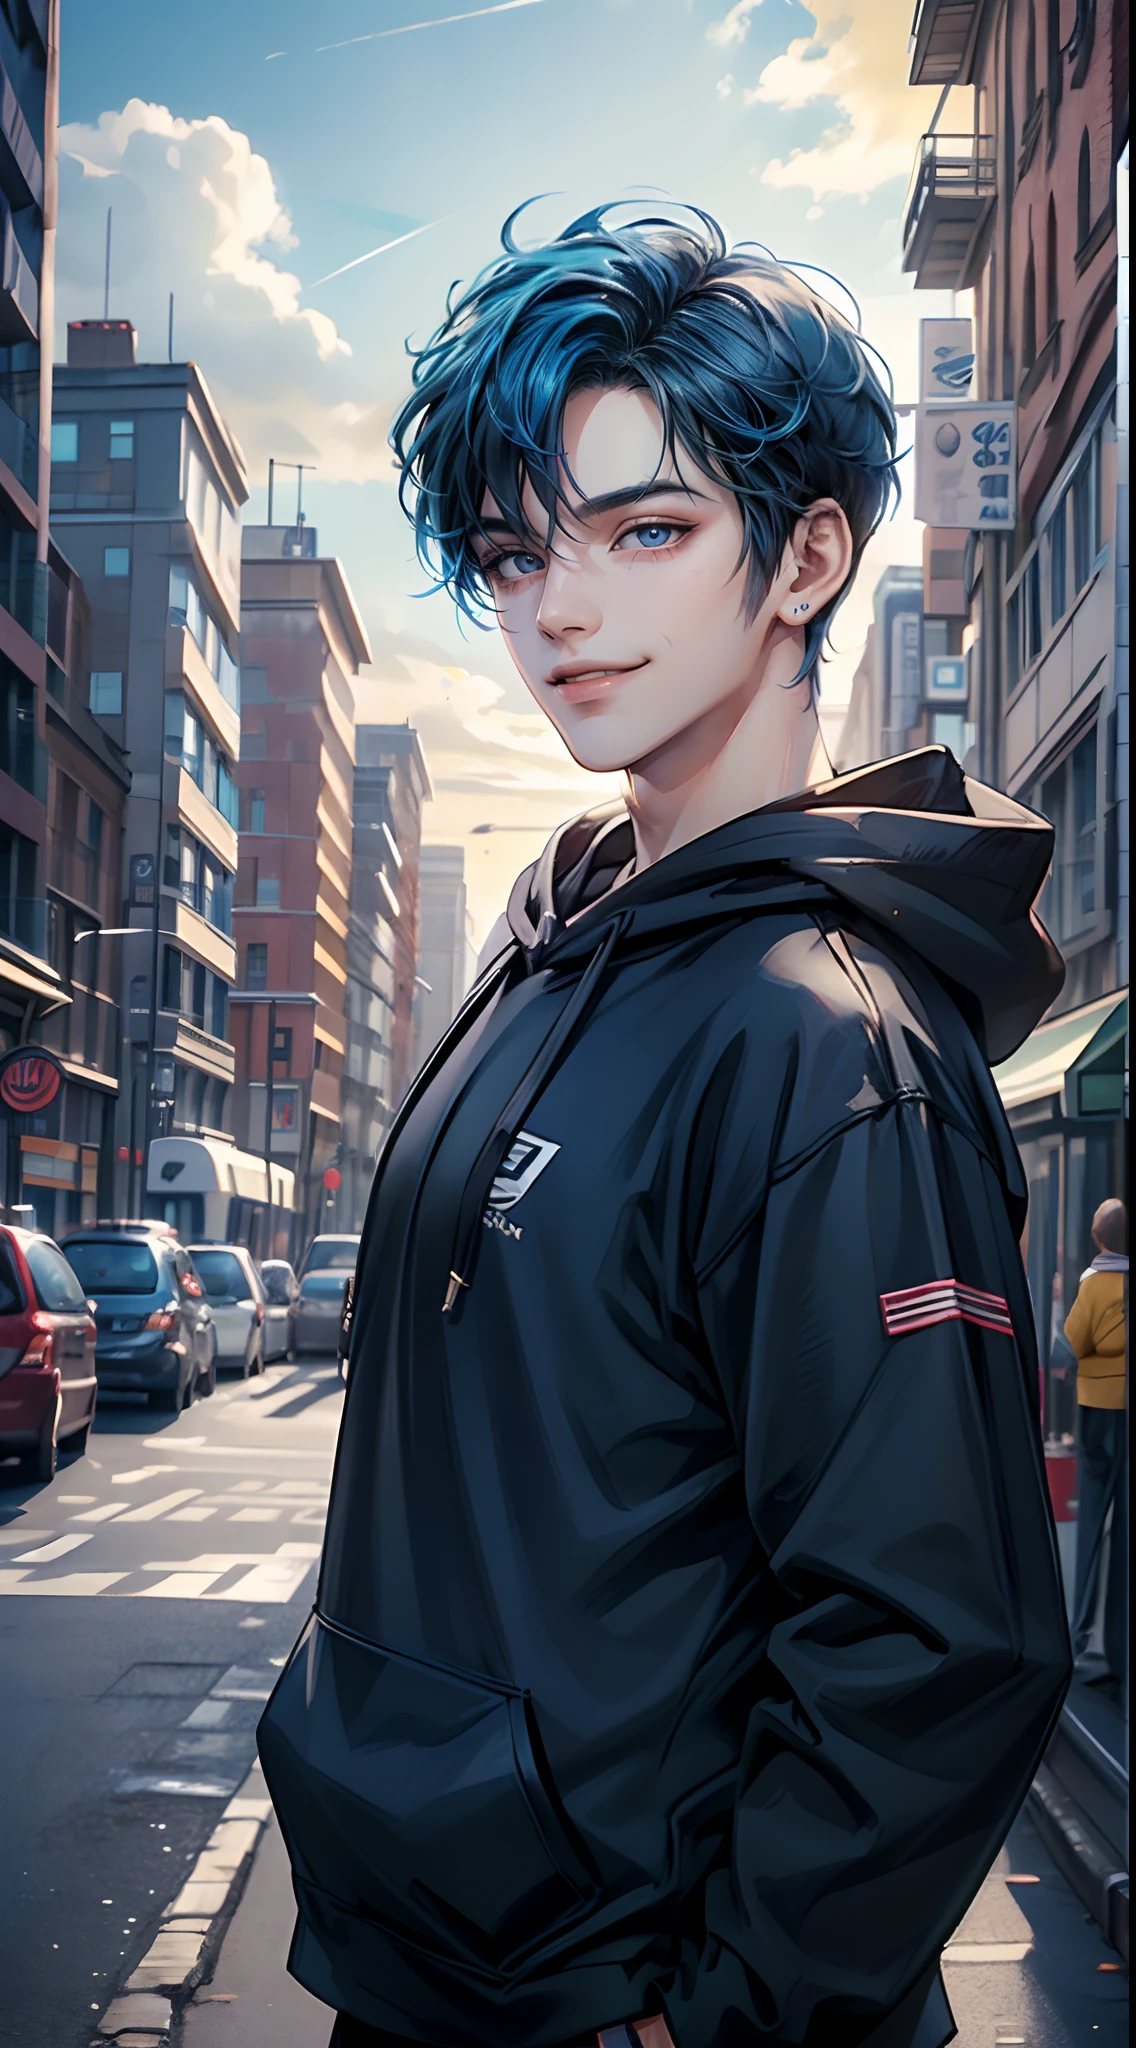 ((4K works))、​masterpiece、(top-quality)、One Beautiful Boy、Slim body、tall、((Attractive street style in black hoodie))、(Detailed beautiful eyes)、Fantastic British cities、Daytime city、((Walking through a city in the UK))、((Daytime bright sky))、((Cities in United Kingdom))、((Shot in UK citieid night、((Short-haired bright blue hair))、((Smaller face))、((White eyes))、((American adult male))、((Adult male 26 years old))、((Cool Men))、((Like a celebrity))、((Smile showing teeth and smiling))、((Korean Makeup))、((elongated and sharp eyes))、((boyish))、((Upper body photography))、((Happy dating))、Professional Photos、((Shot alone))、((Shot diagonally from the side))、((Shot in close proximity to him))、((He is walking next to the viewer))、((Focus zoom in))